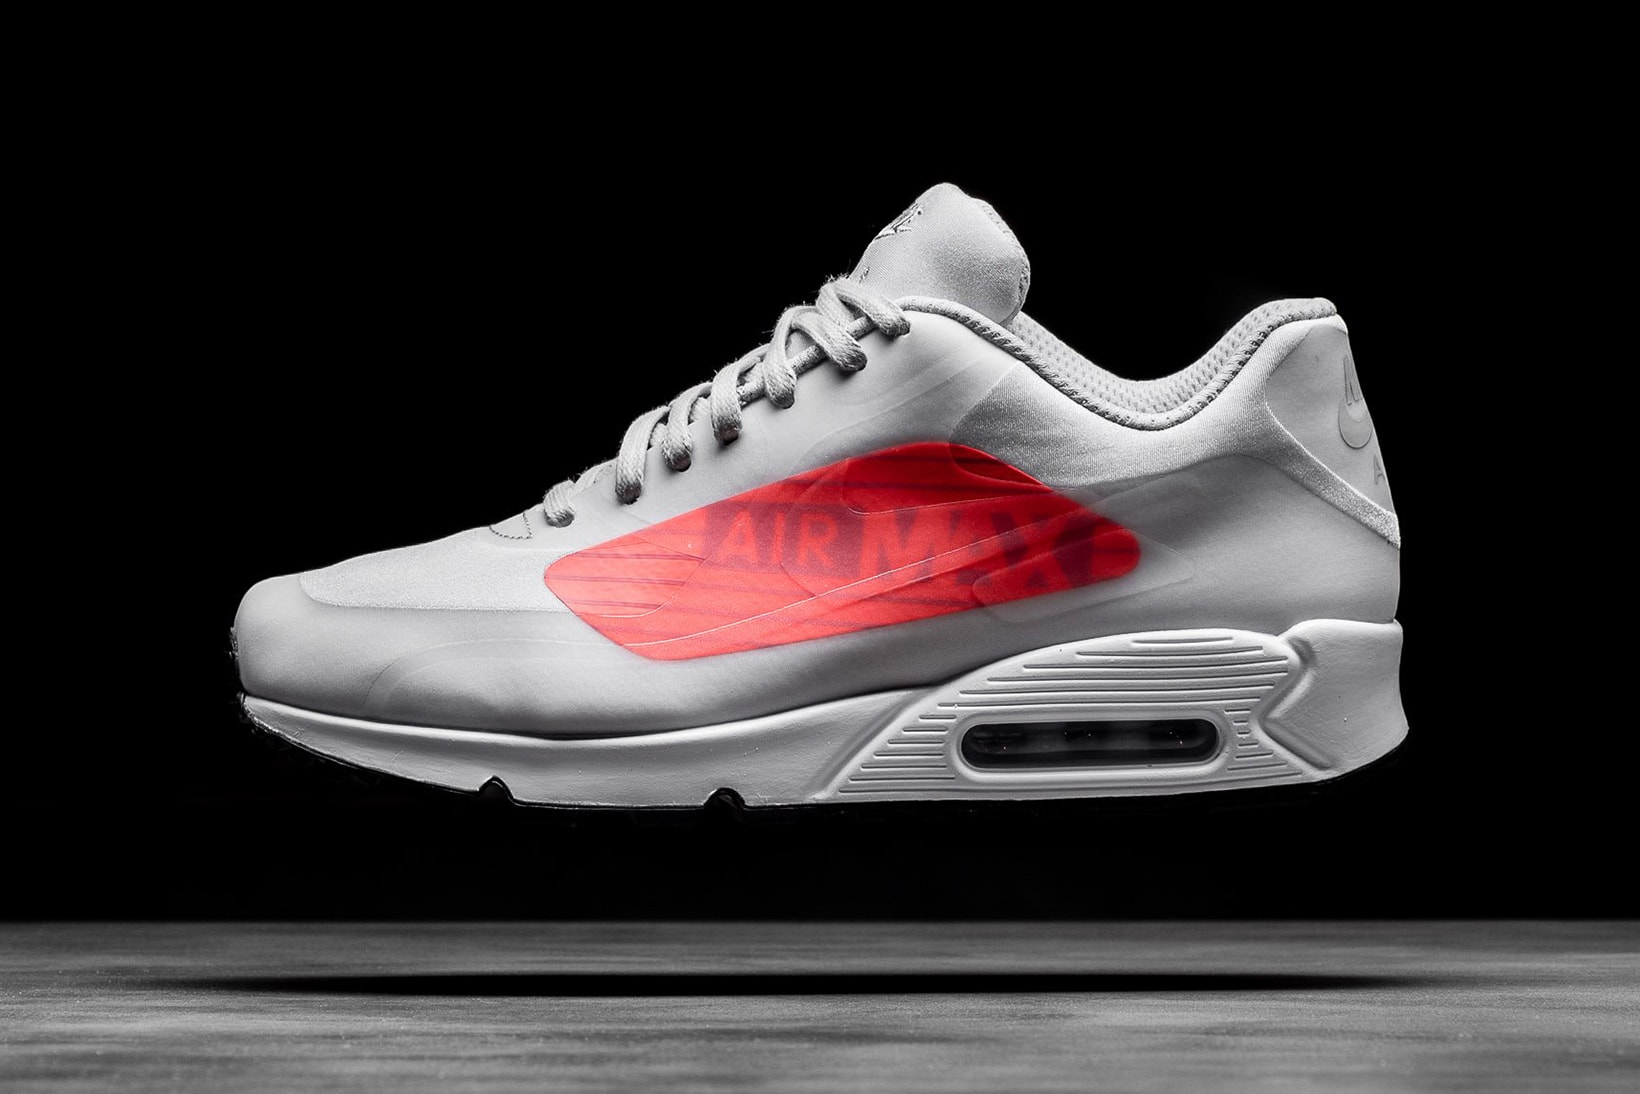 Nike Air Max 90 95 NS GPX Big Logo Oversized Bright Crimson Infrared Volt Neon 2017 November 11 Release Date Info Sneakers Shoes Footwear Politics